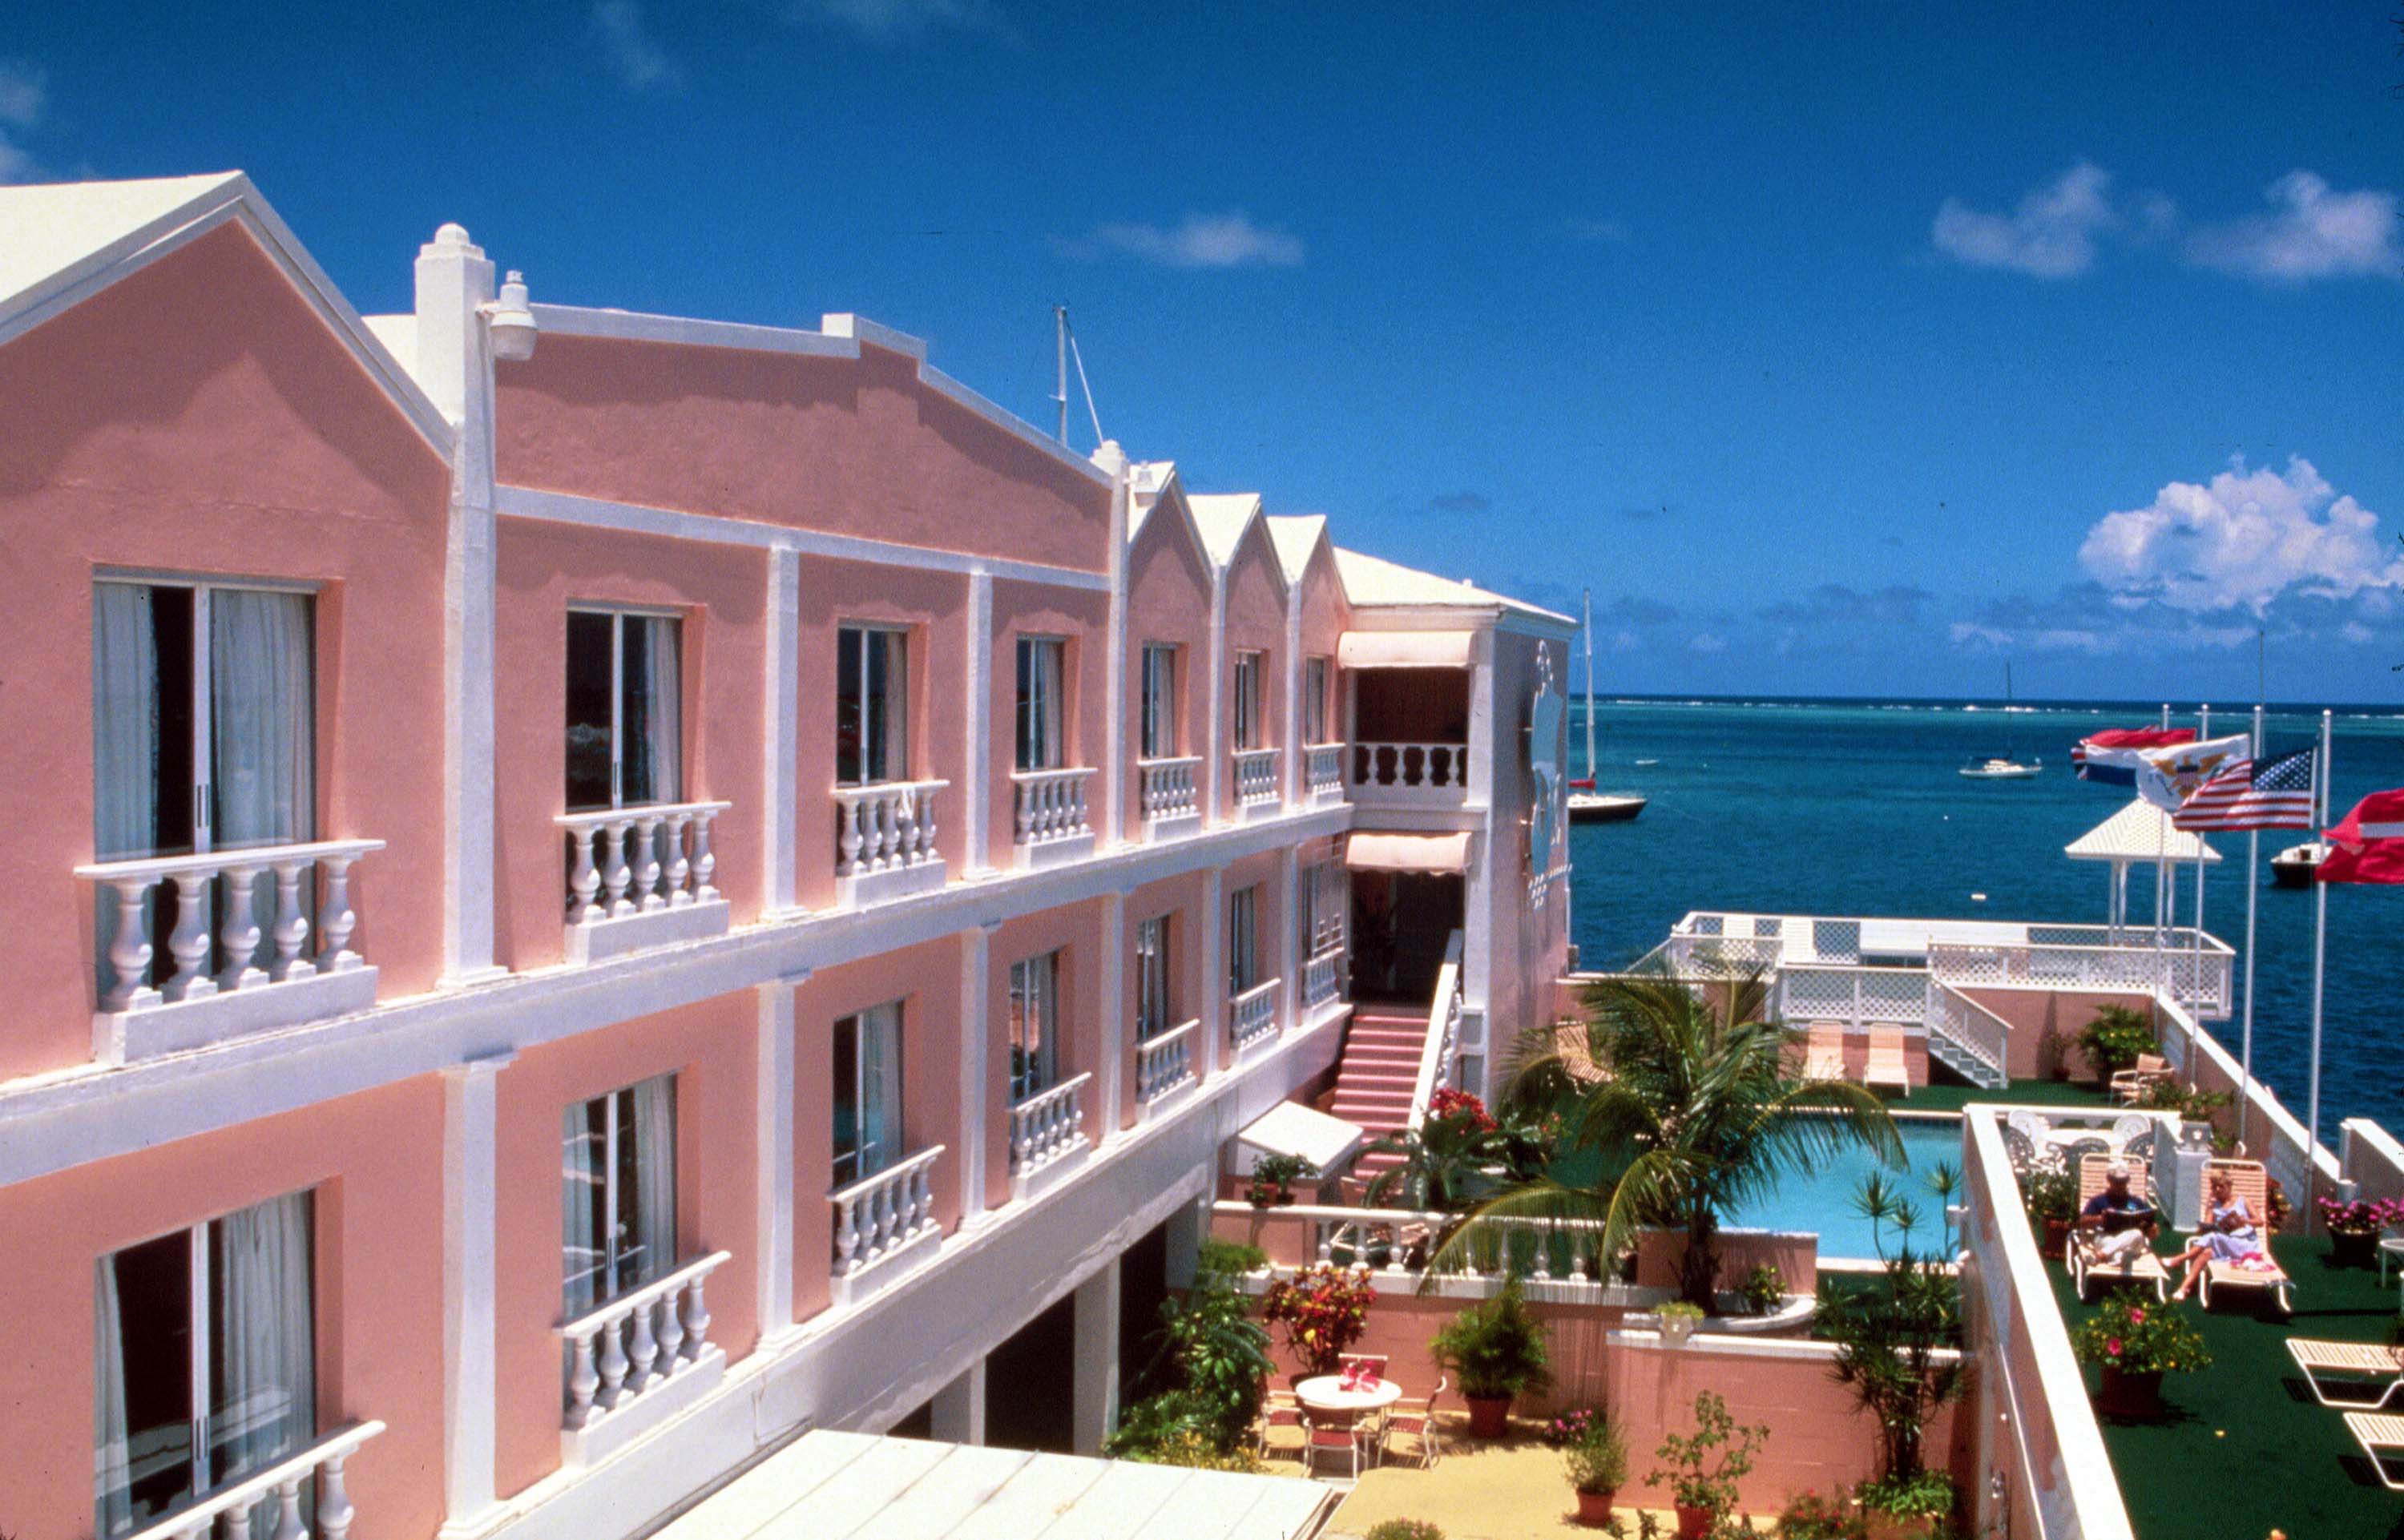 Caravelle Hotel, Saint Croix Deals - See Hotel Photos - Attractions ...